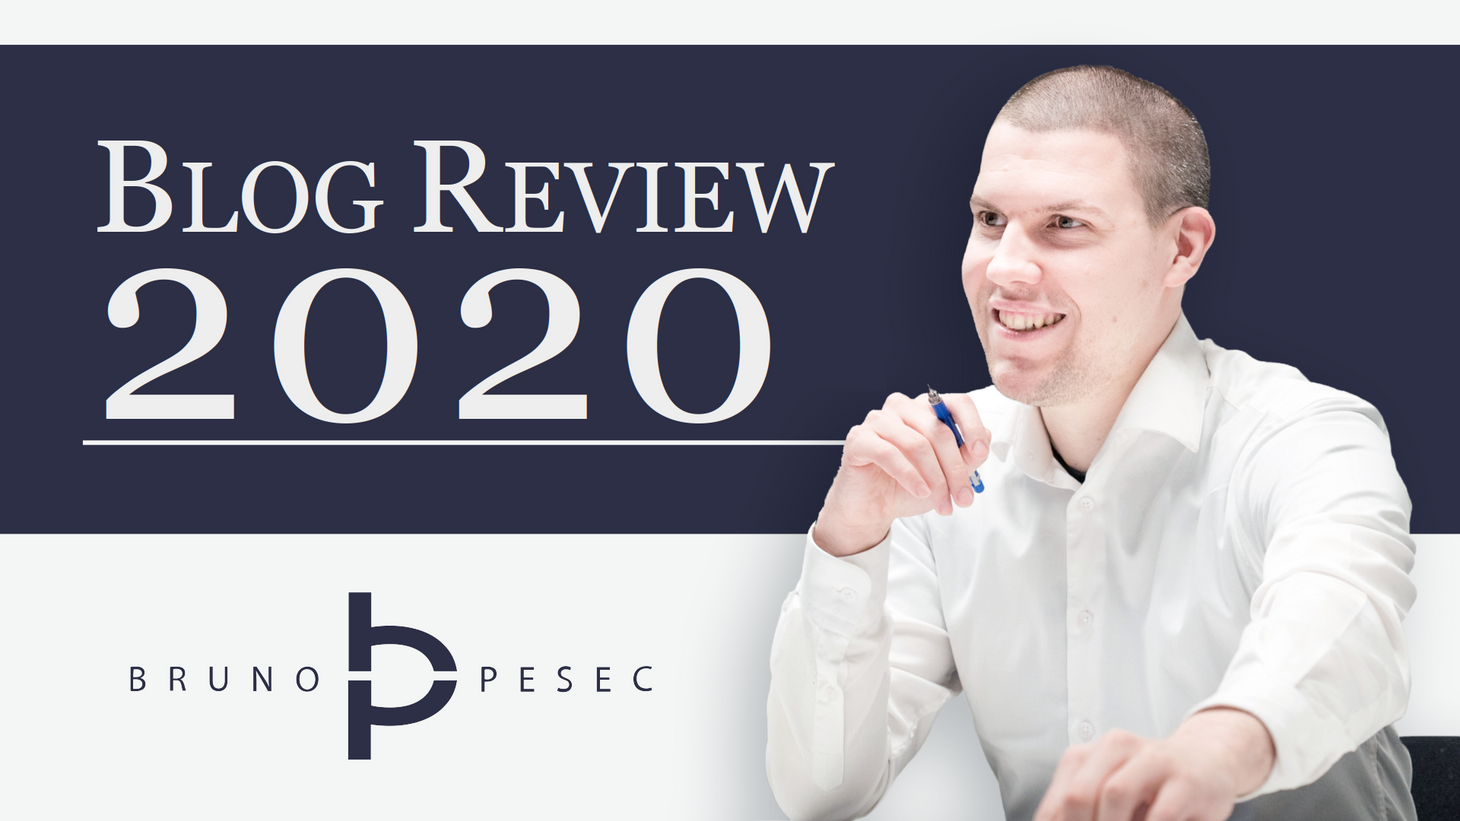 Blog review 2020